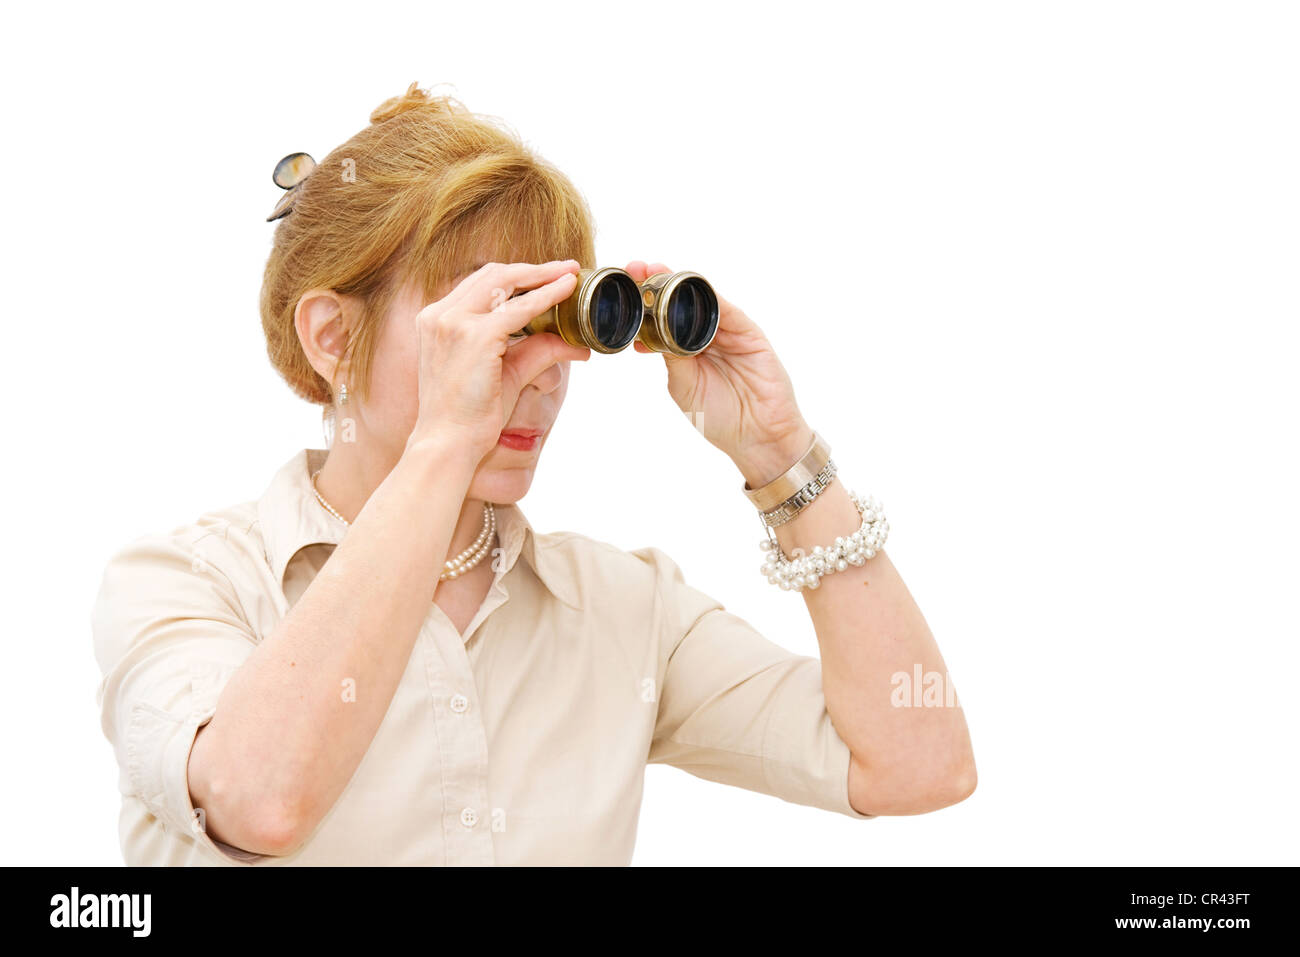 In search for success - mature businesswoman looking through binoculars. Isolated over white background with room for your text. Stock Photo